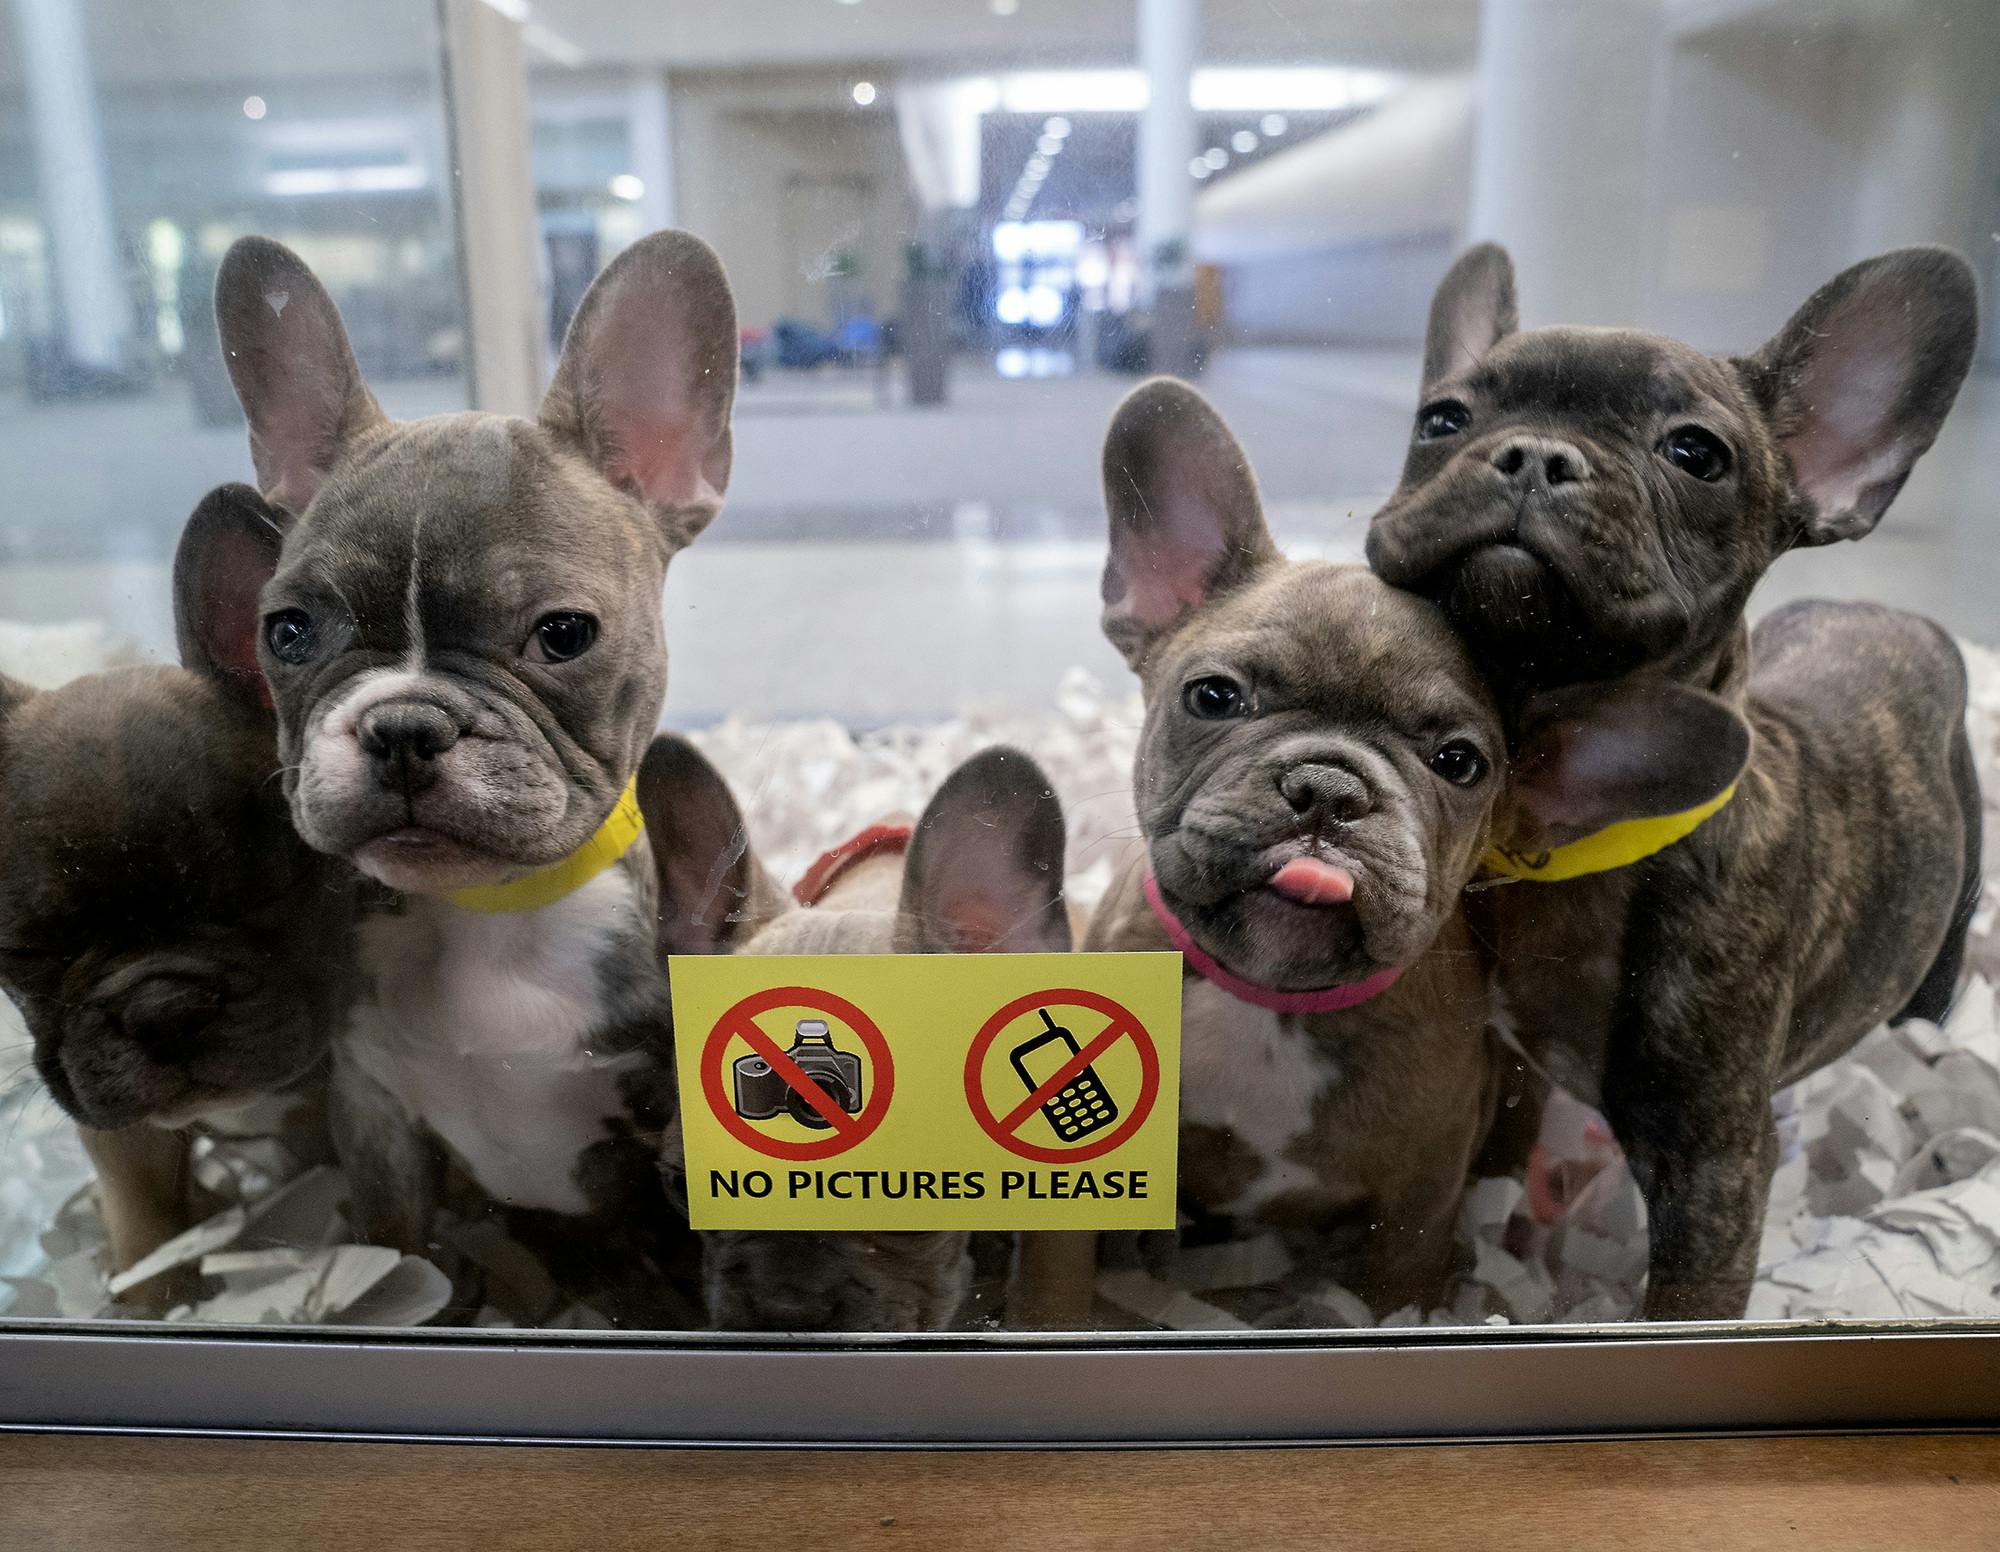 Puppies, protests and a clash of beliefs at last Twin Cities pet shop